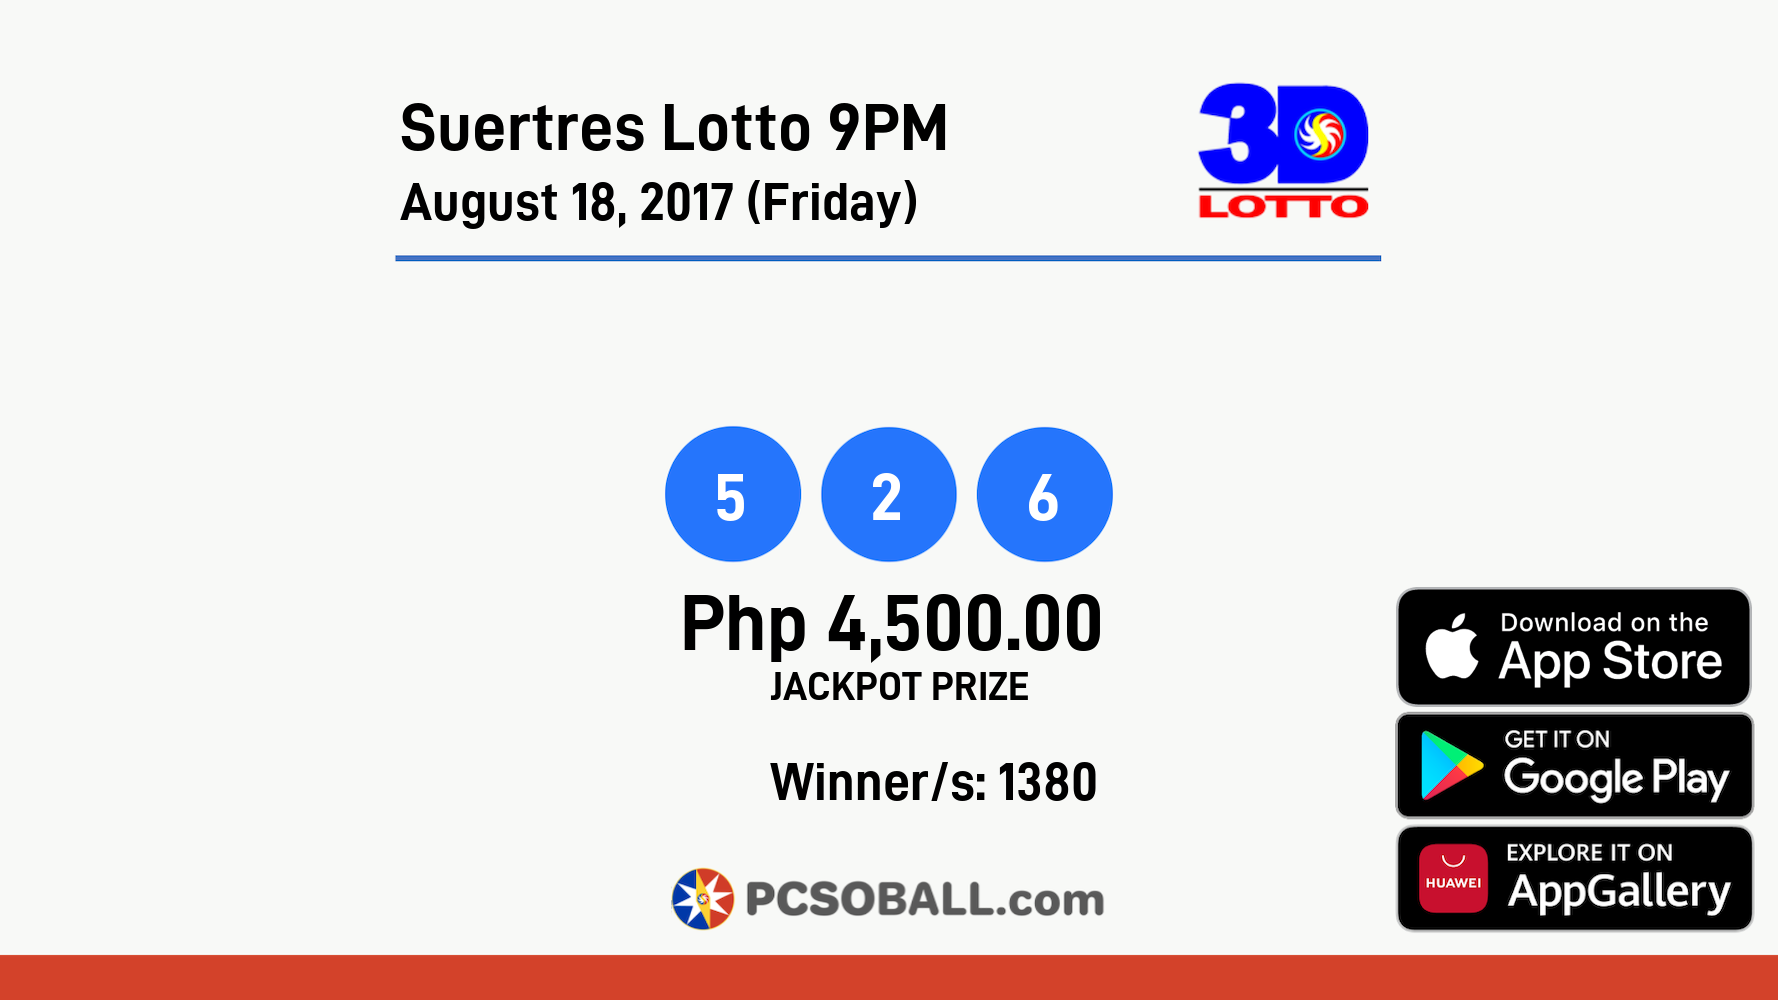 Suertres Lotto 9PM August 18, 2017 (Friday) Result